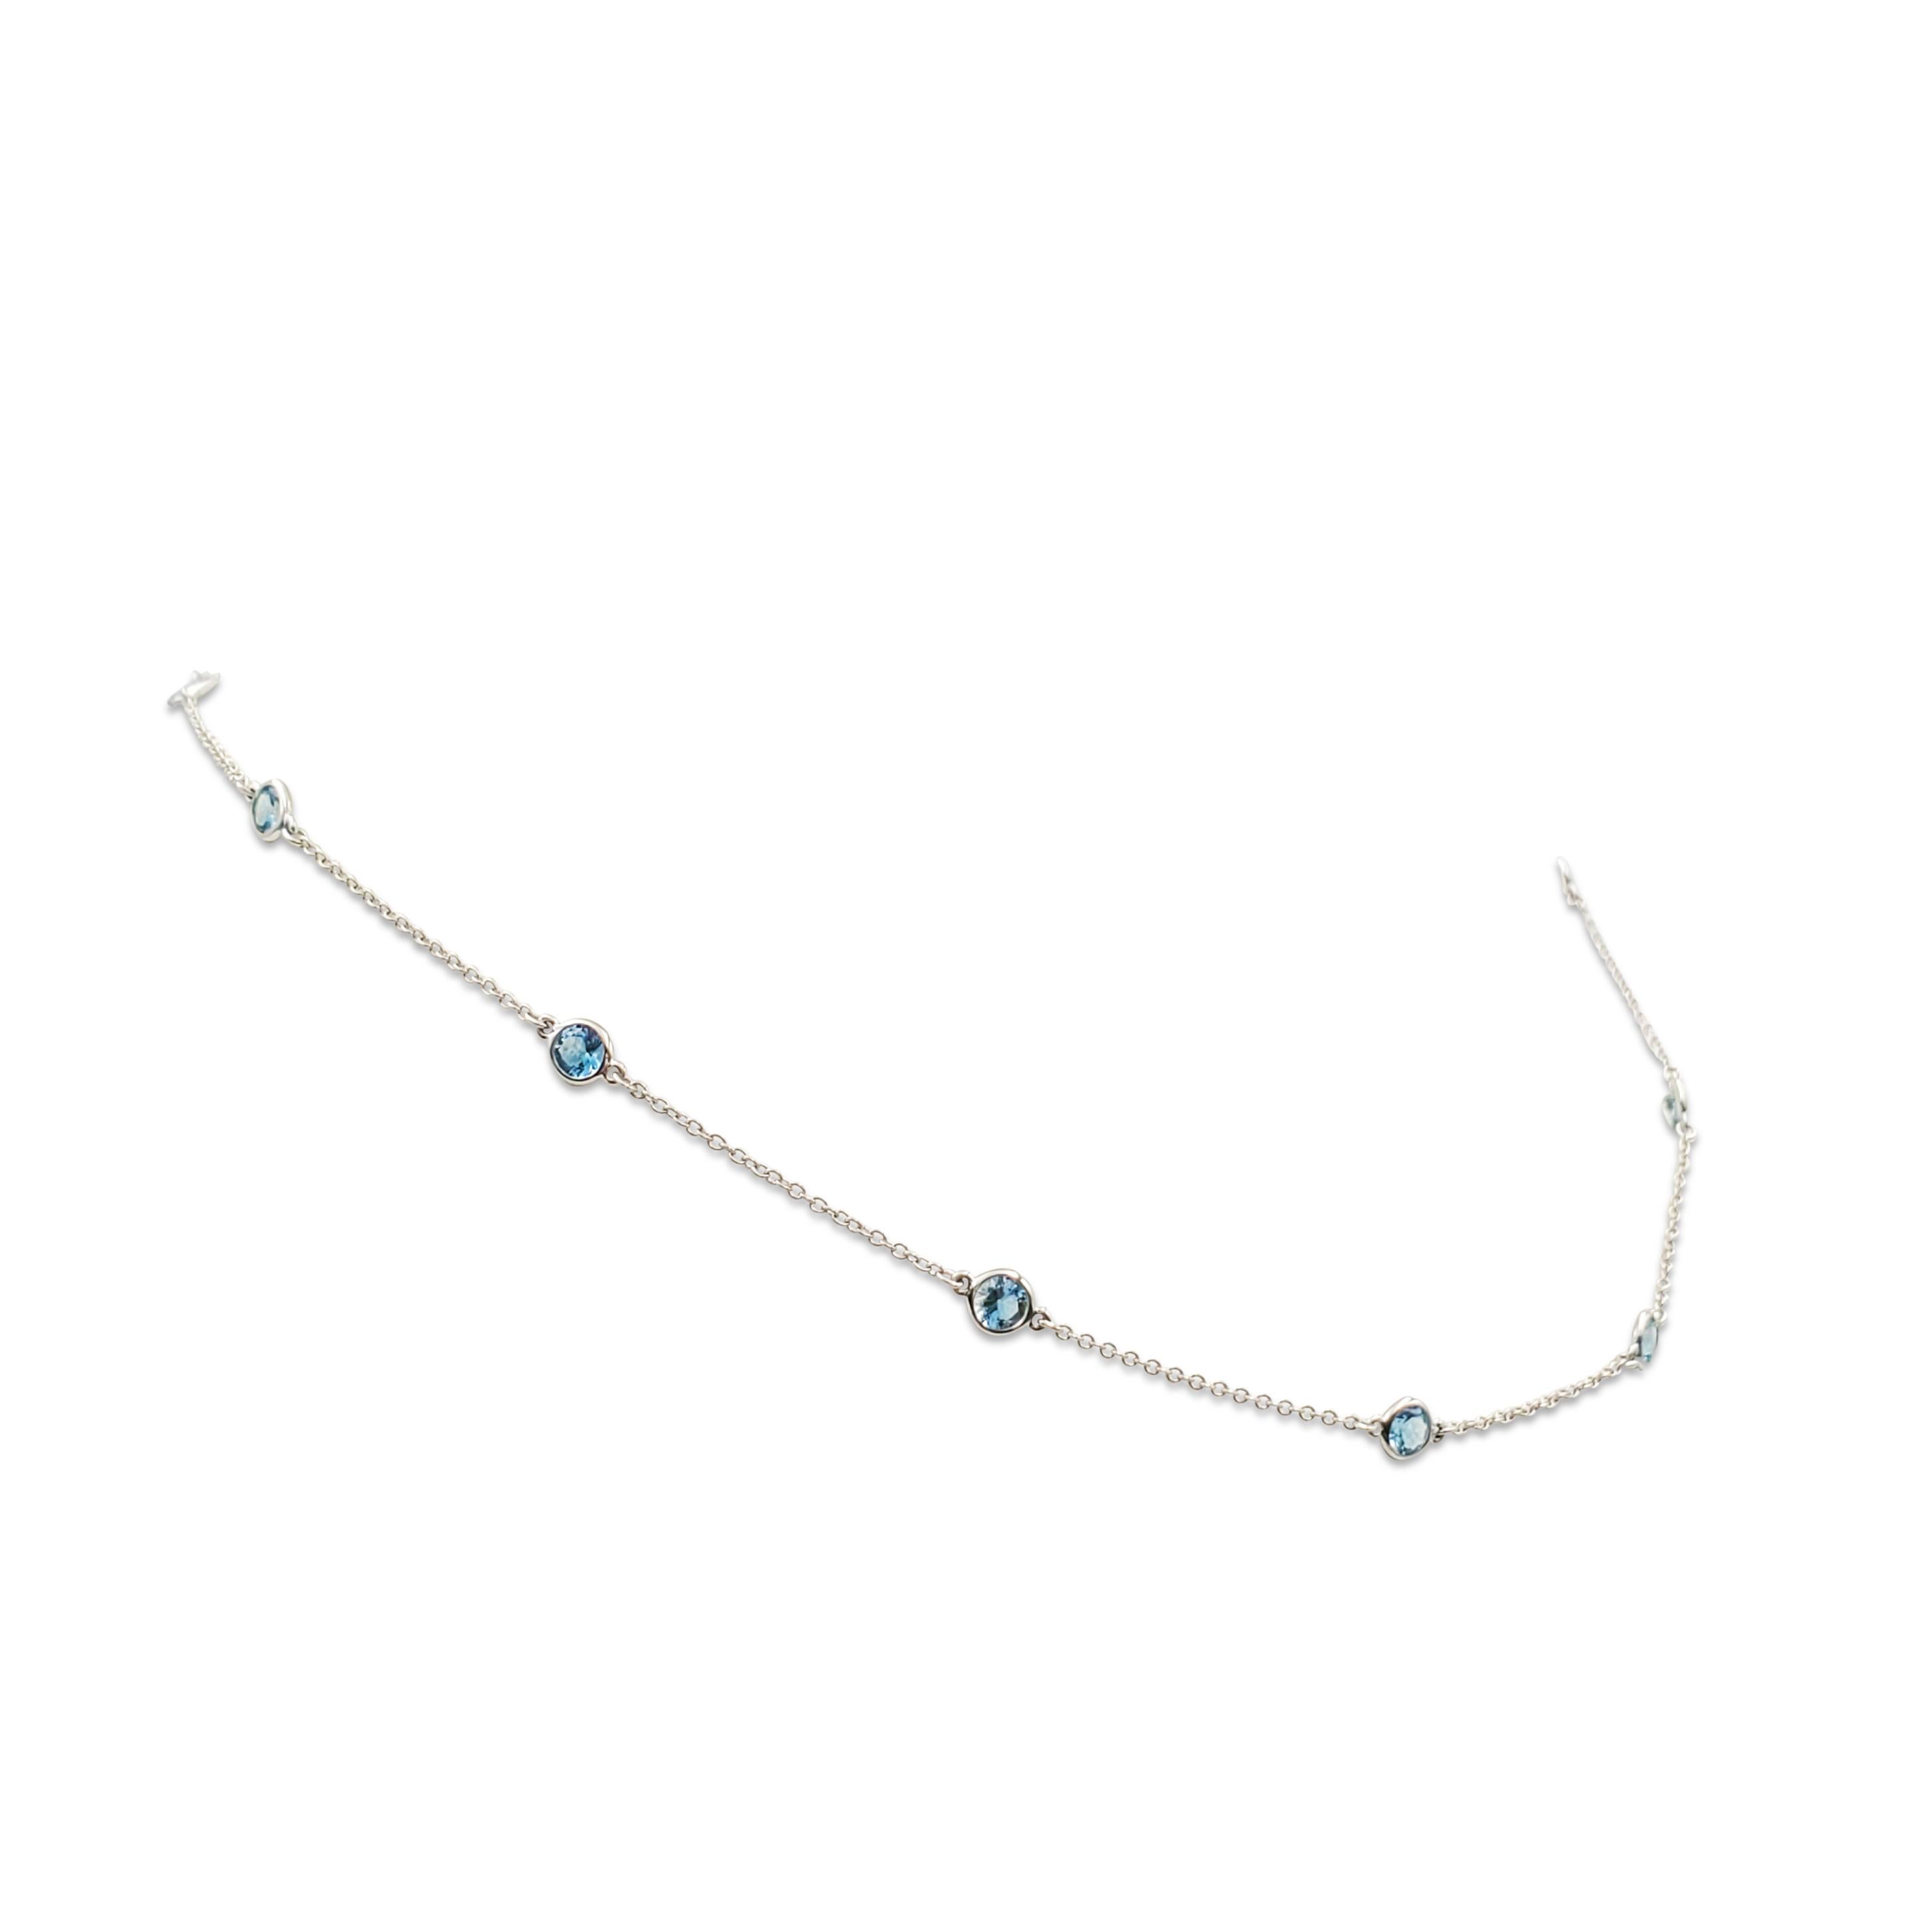 Authentic Elsa Peretti for Tiffany & Co. Color by the Yard necklace crafted in platinum.  The delicate 16 inch necklace is bezel set with 11 round cut aquamarine and measures 15 3/4 inches in length.  Signed Tiffany & Co., Peretti, PT950.  Necklace